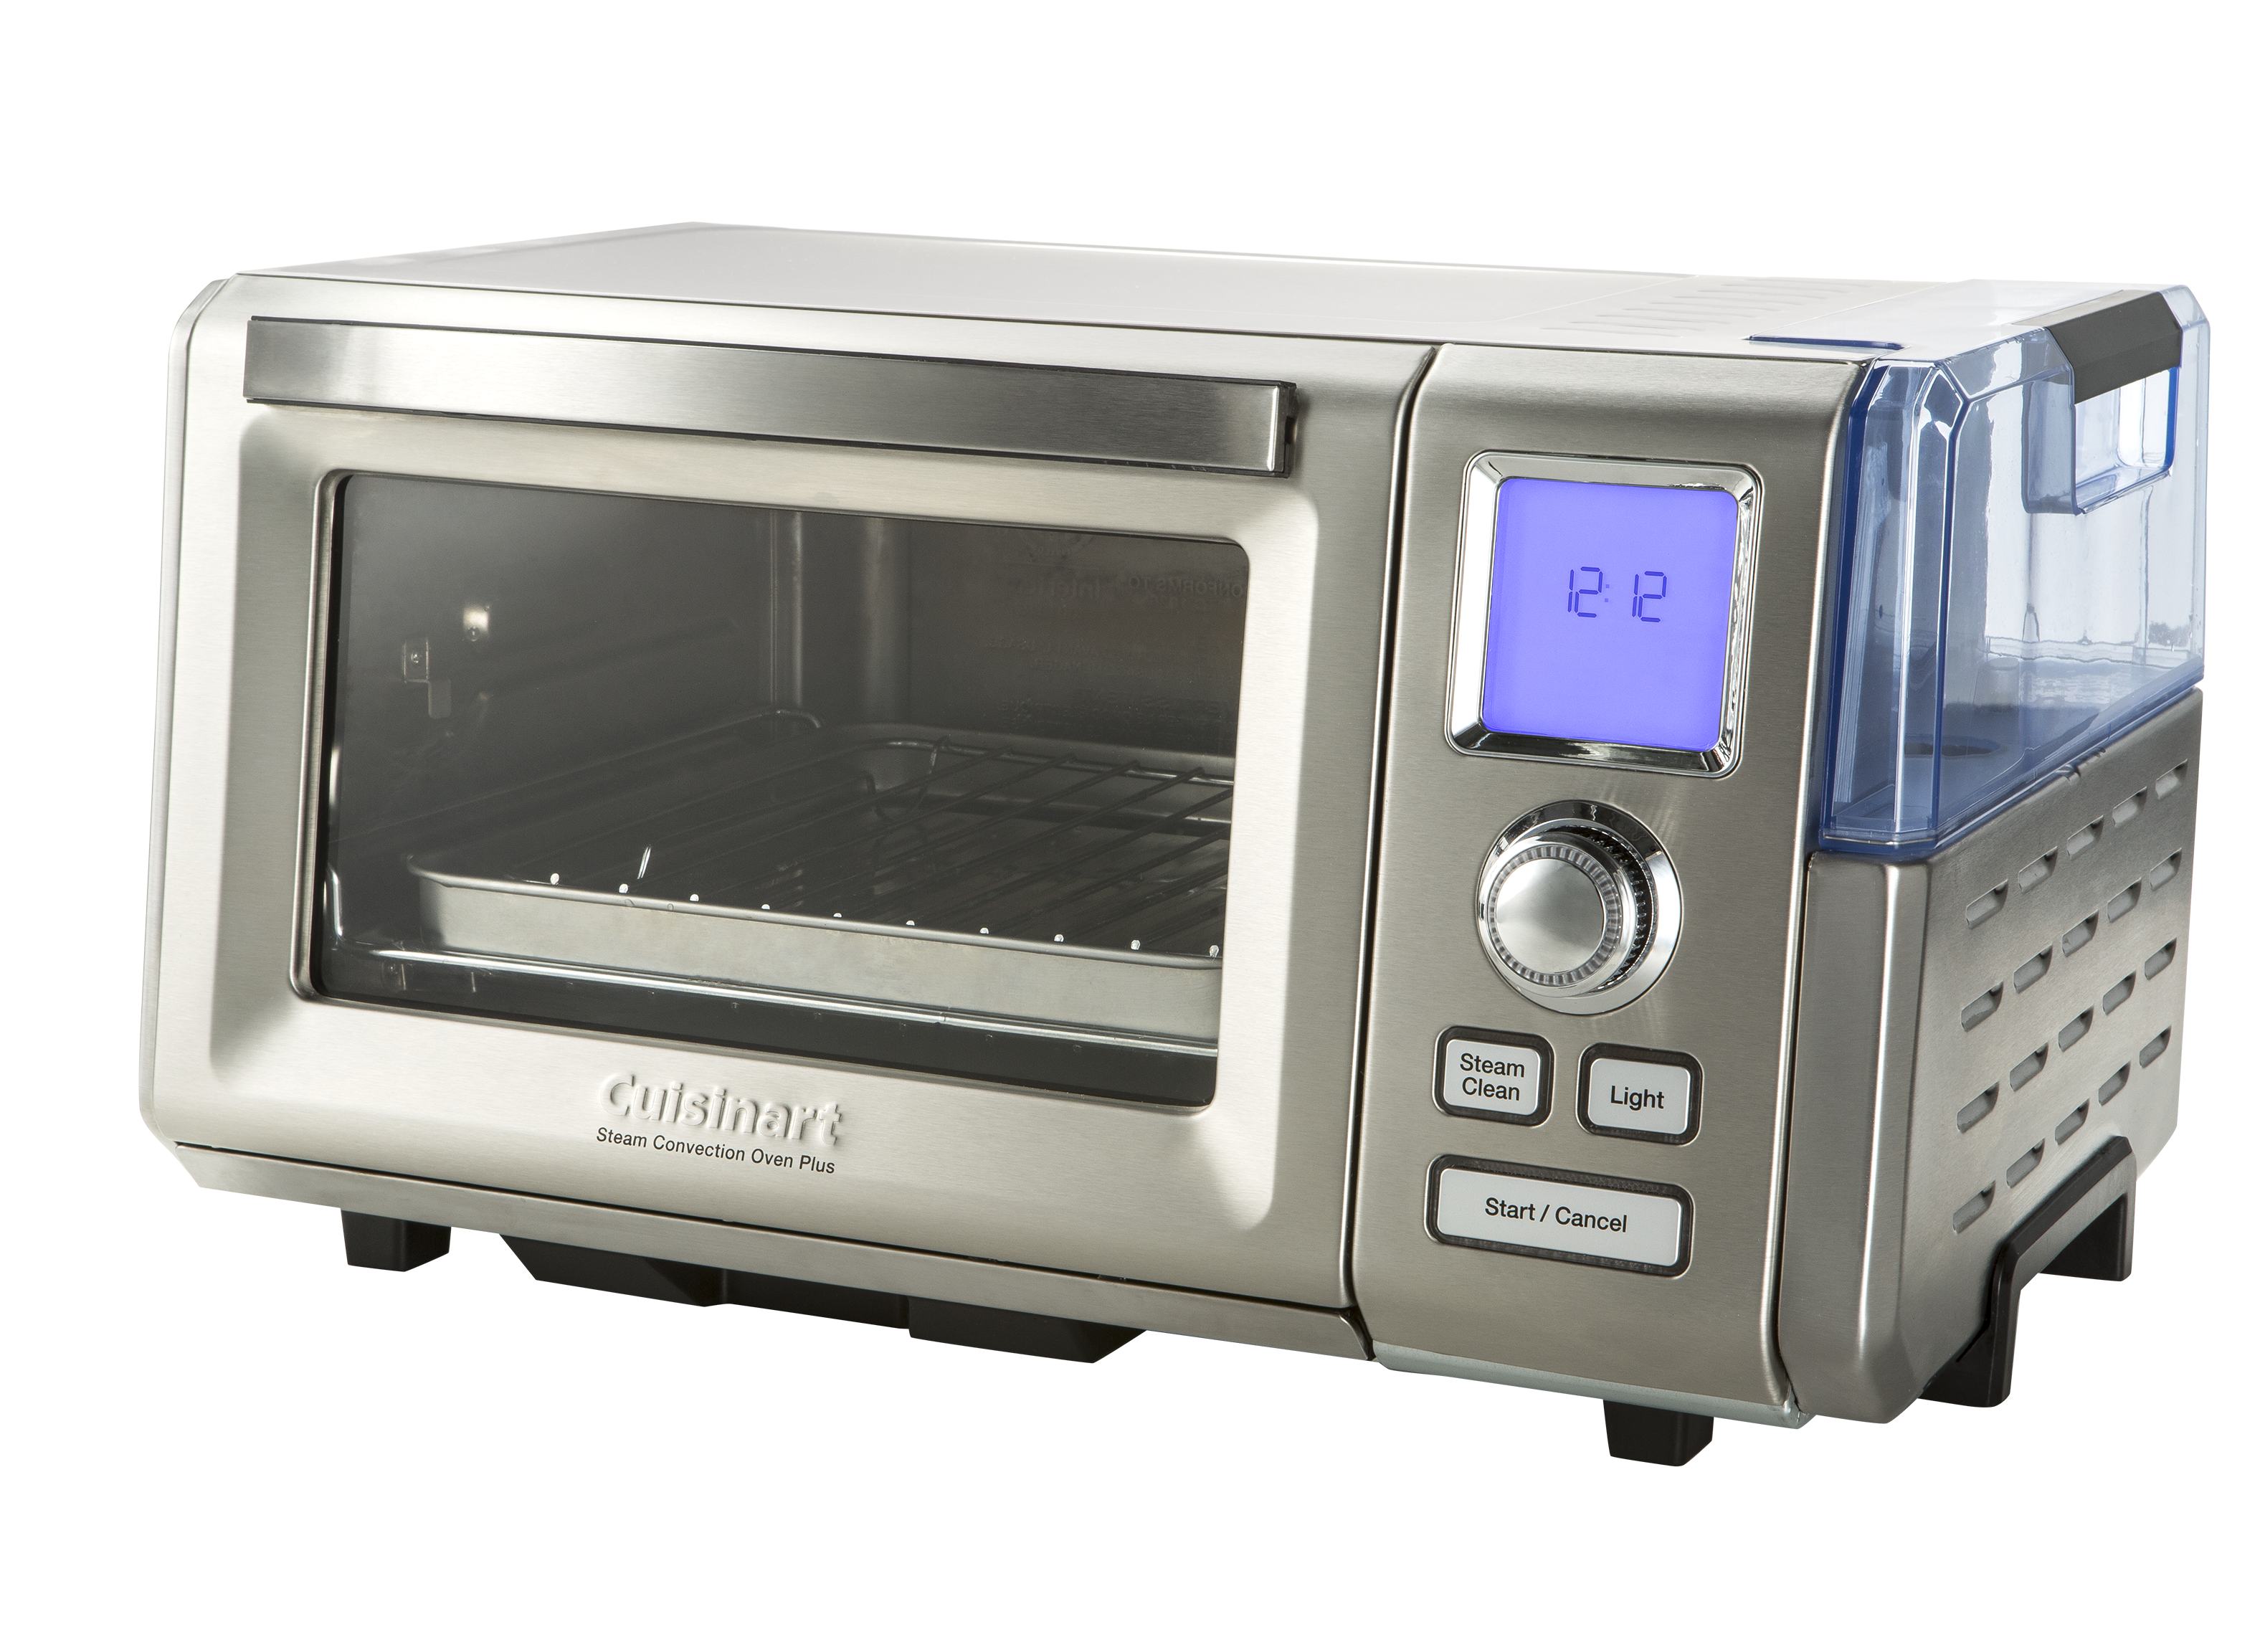 Renewed Cuisinart CSO-300 Combo Steam and Convection Toaster Oven Includes 6-Piece Gadget Crock Set and 2 Cookbooks Stainless Steel 